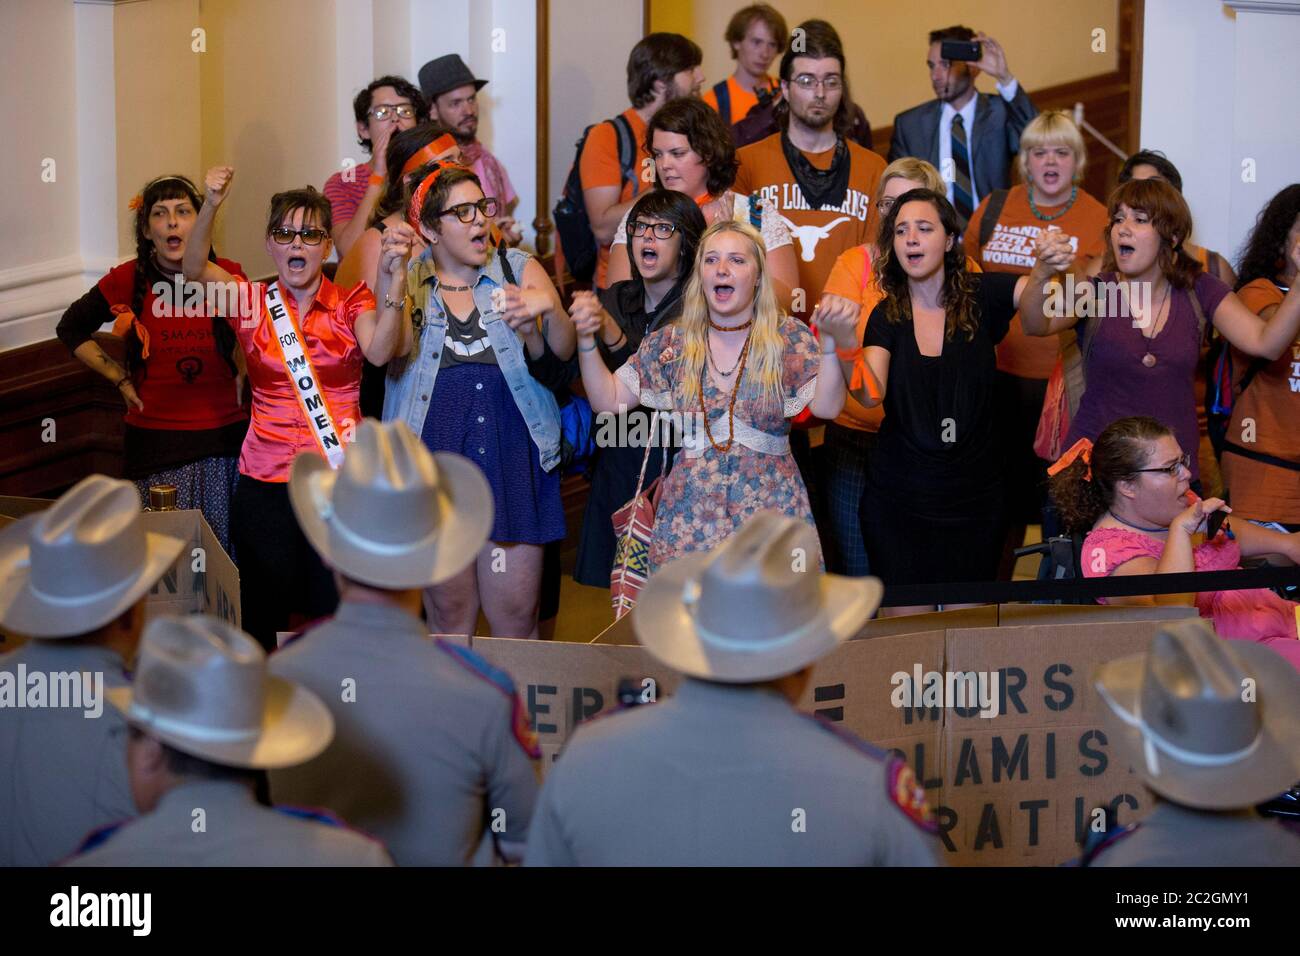 Austin Texas USA, July 2013: A rowdy group of women's rights and pro-choice advocates demonstrates outside the Texas House of Representatives chamber as Dept. of Public Safety troopers guard the doors. The women are protesting against a final House vote that restricts abortion providers in Texas. The bill gets a final look in the Senate later this week.   ©Bob Daemmrich Stock Photo